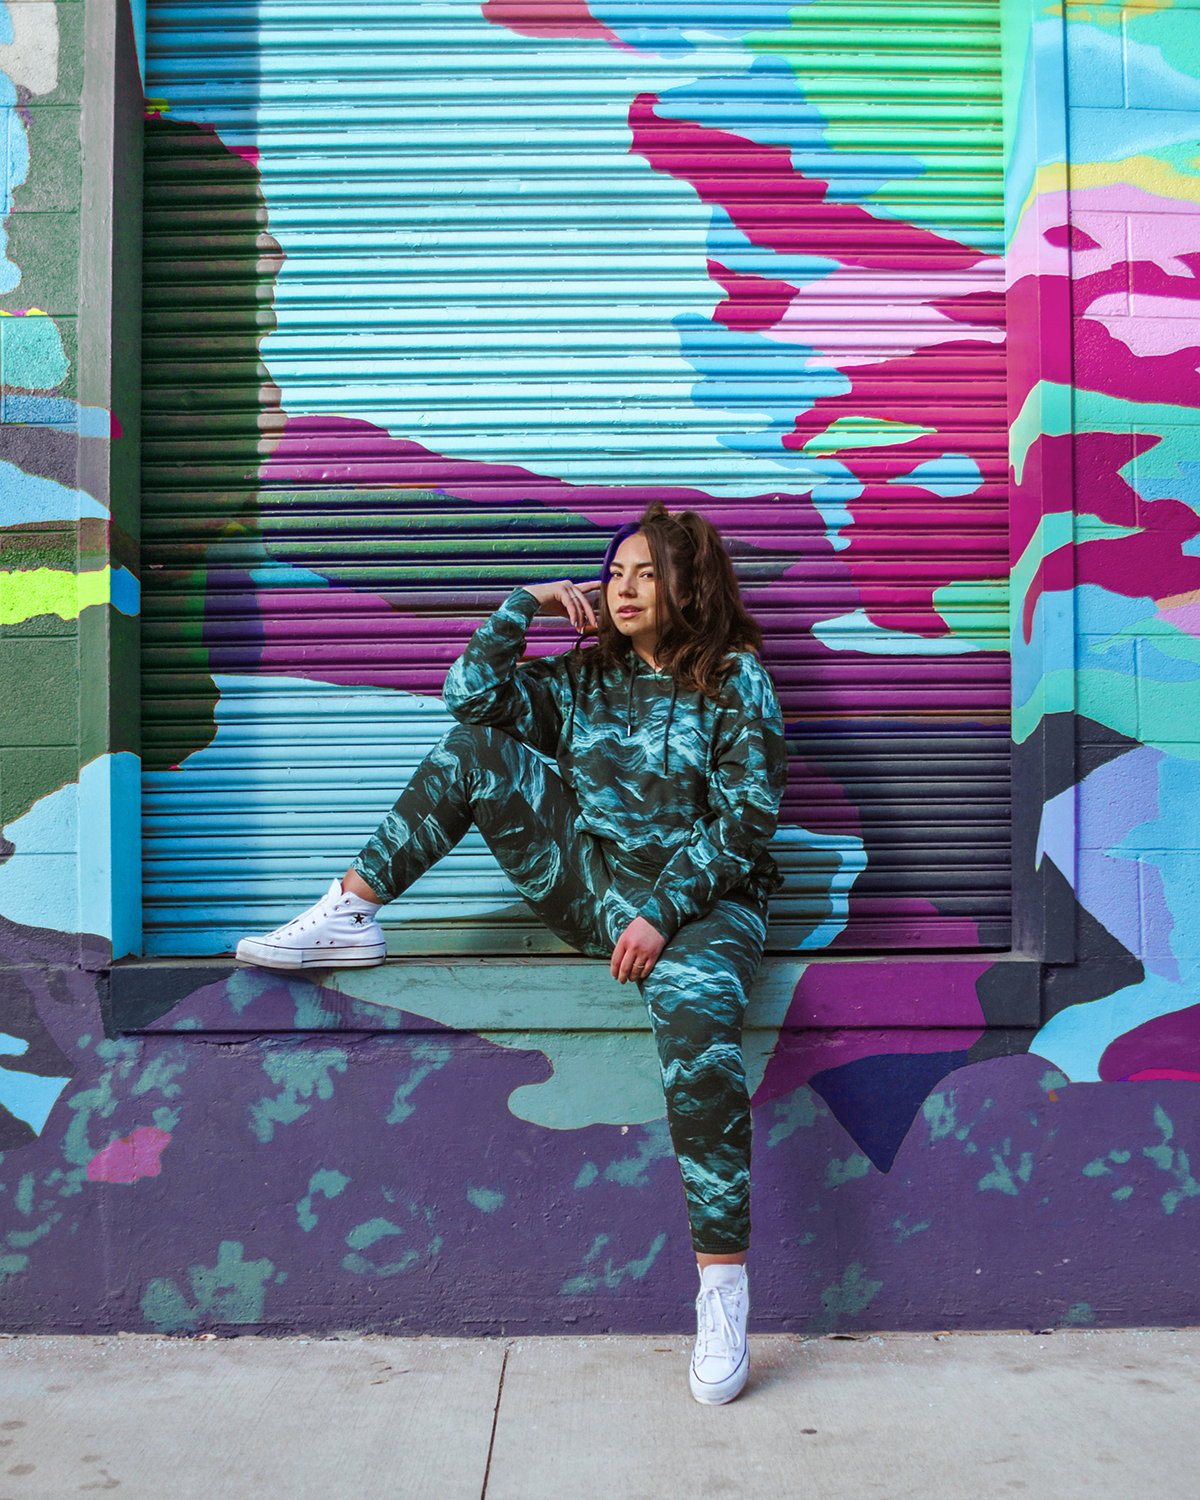 Instagram influencer Lauryncakes sits in front of a painted garage with a colorful wall mural while wearing a green sweat suit with camo print